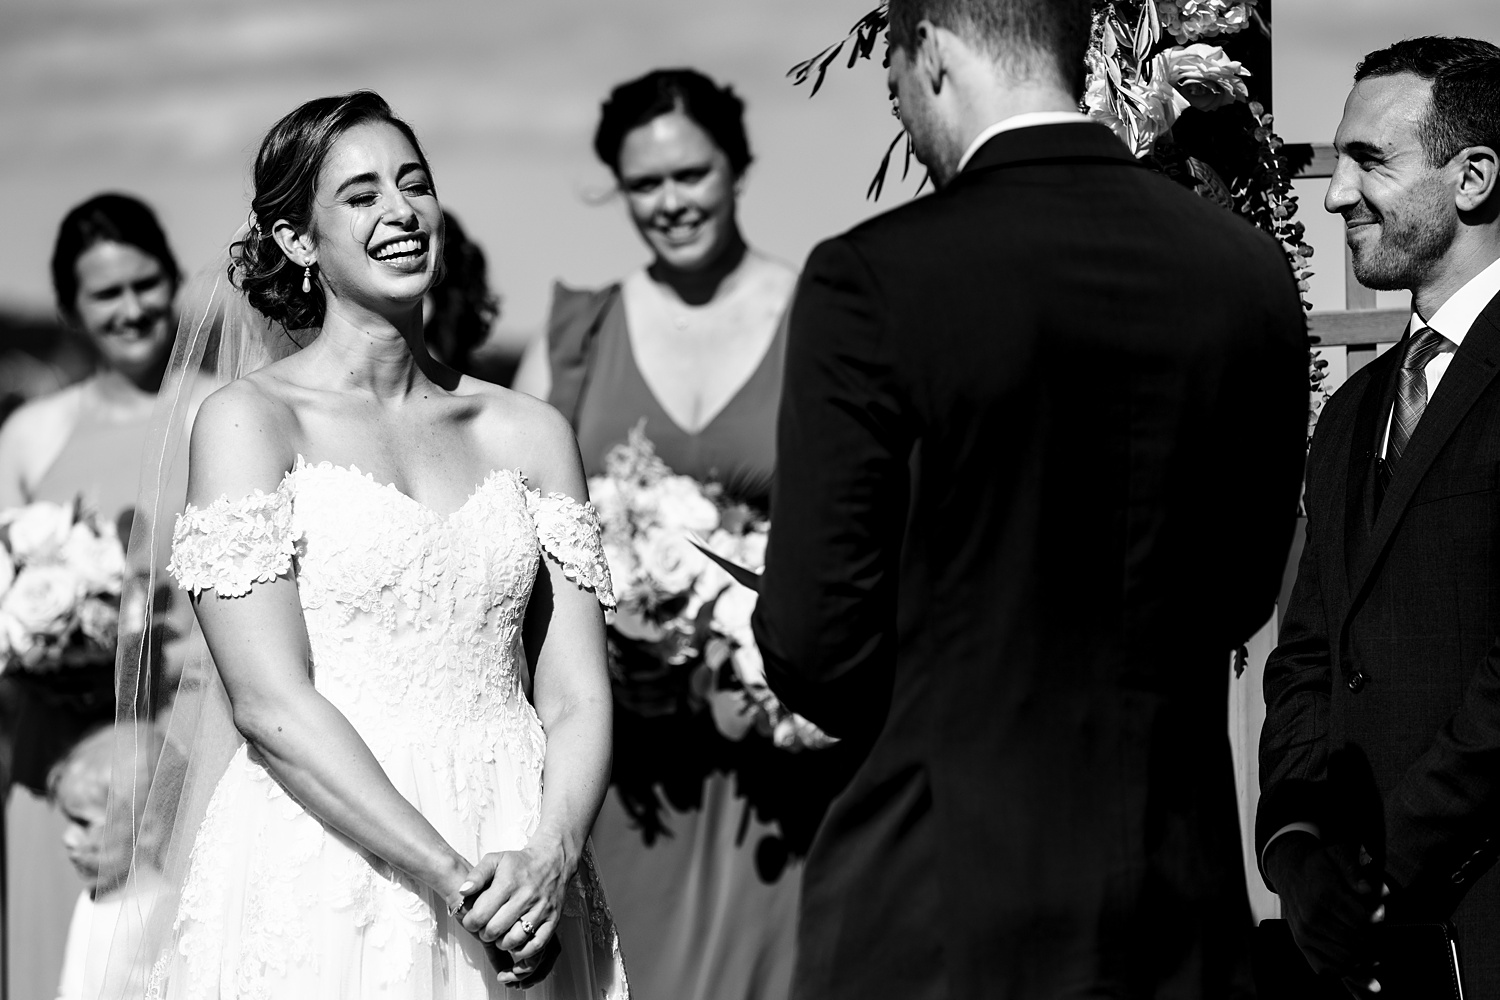 The bride laughs during the vows on her wedding day at Stageneck Inn in York Maine